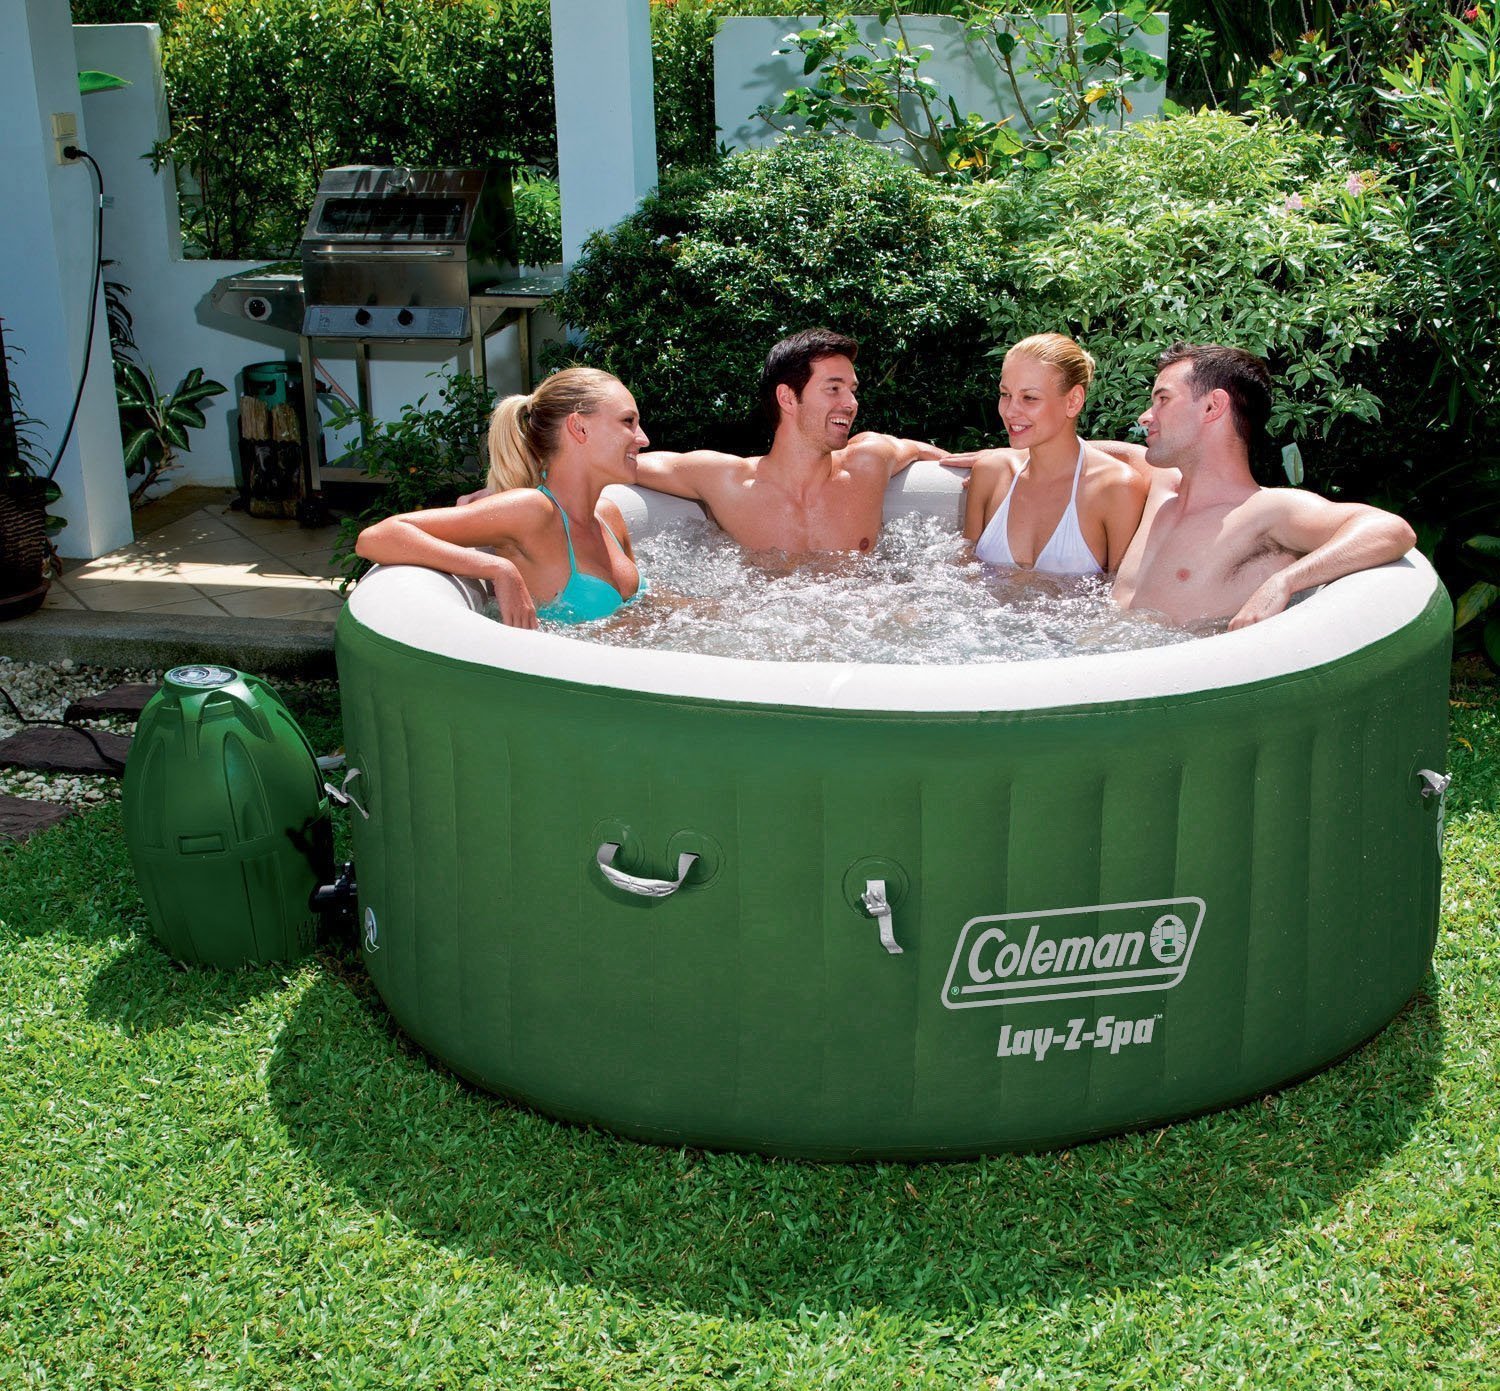 Coleman Lay Z Spa Inflatable 4 Person Hot Tub 